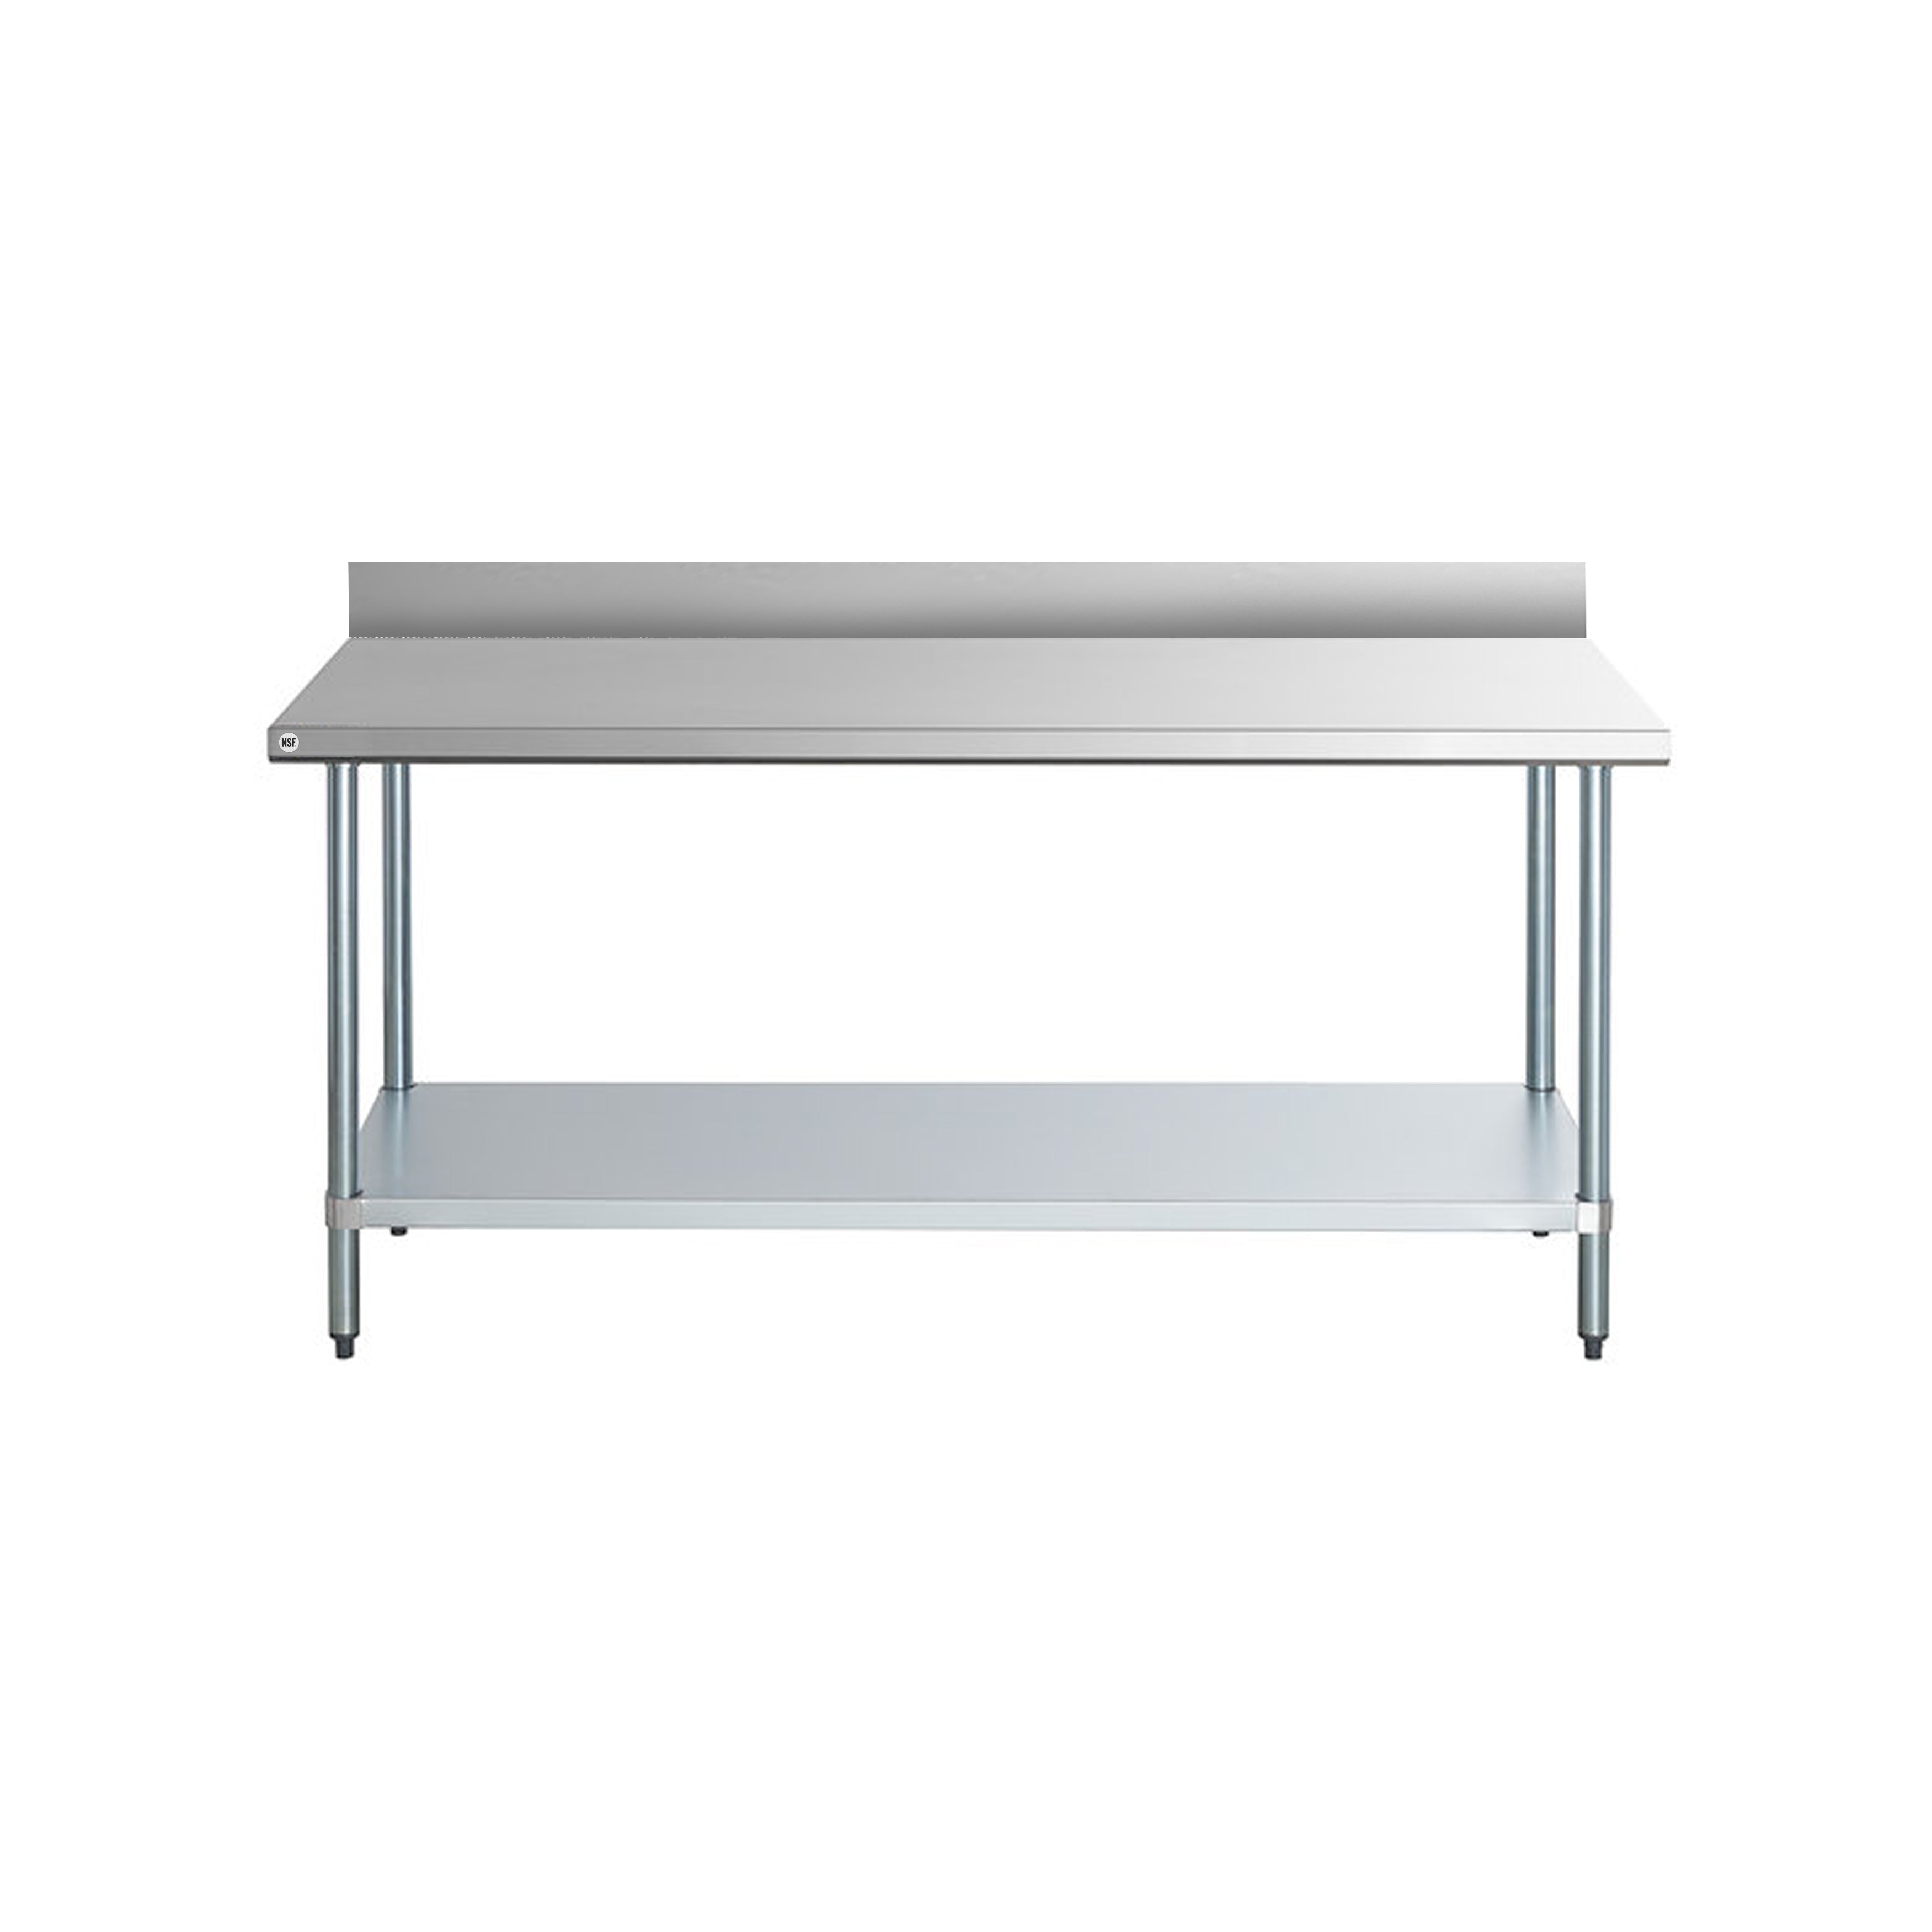 Omcan - 22089, Commercial 30" x 60" Stainless Steel Kitchen Work Table with 4" BackSplash 1200lbs Light Duty